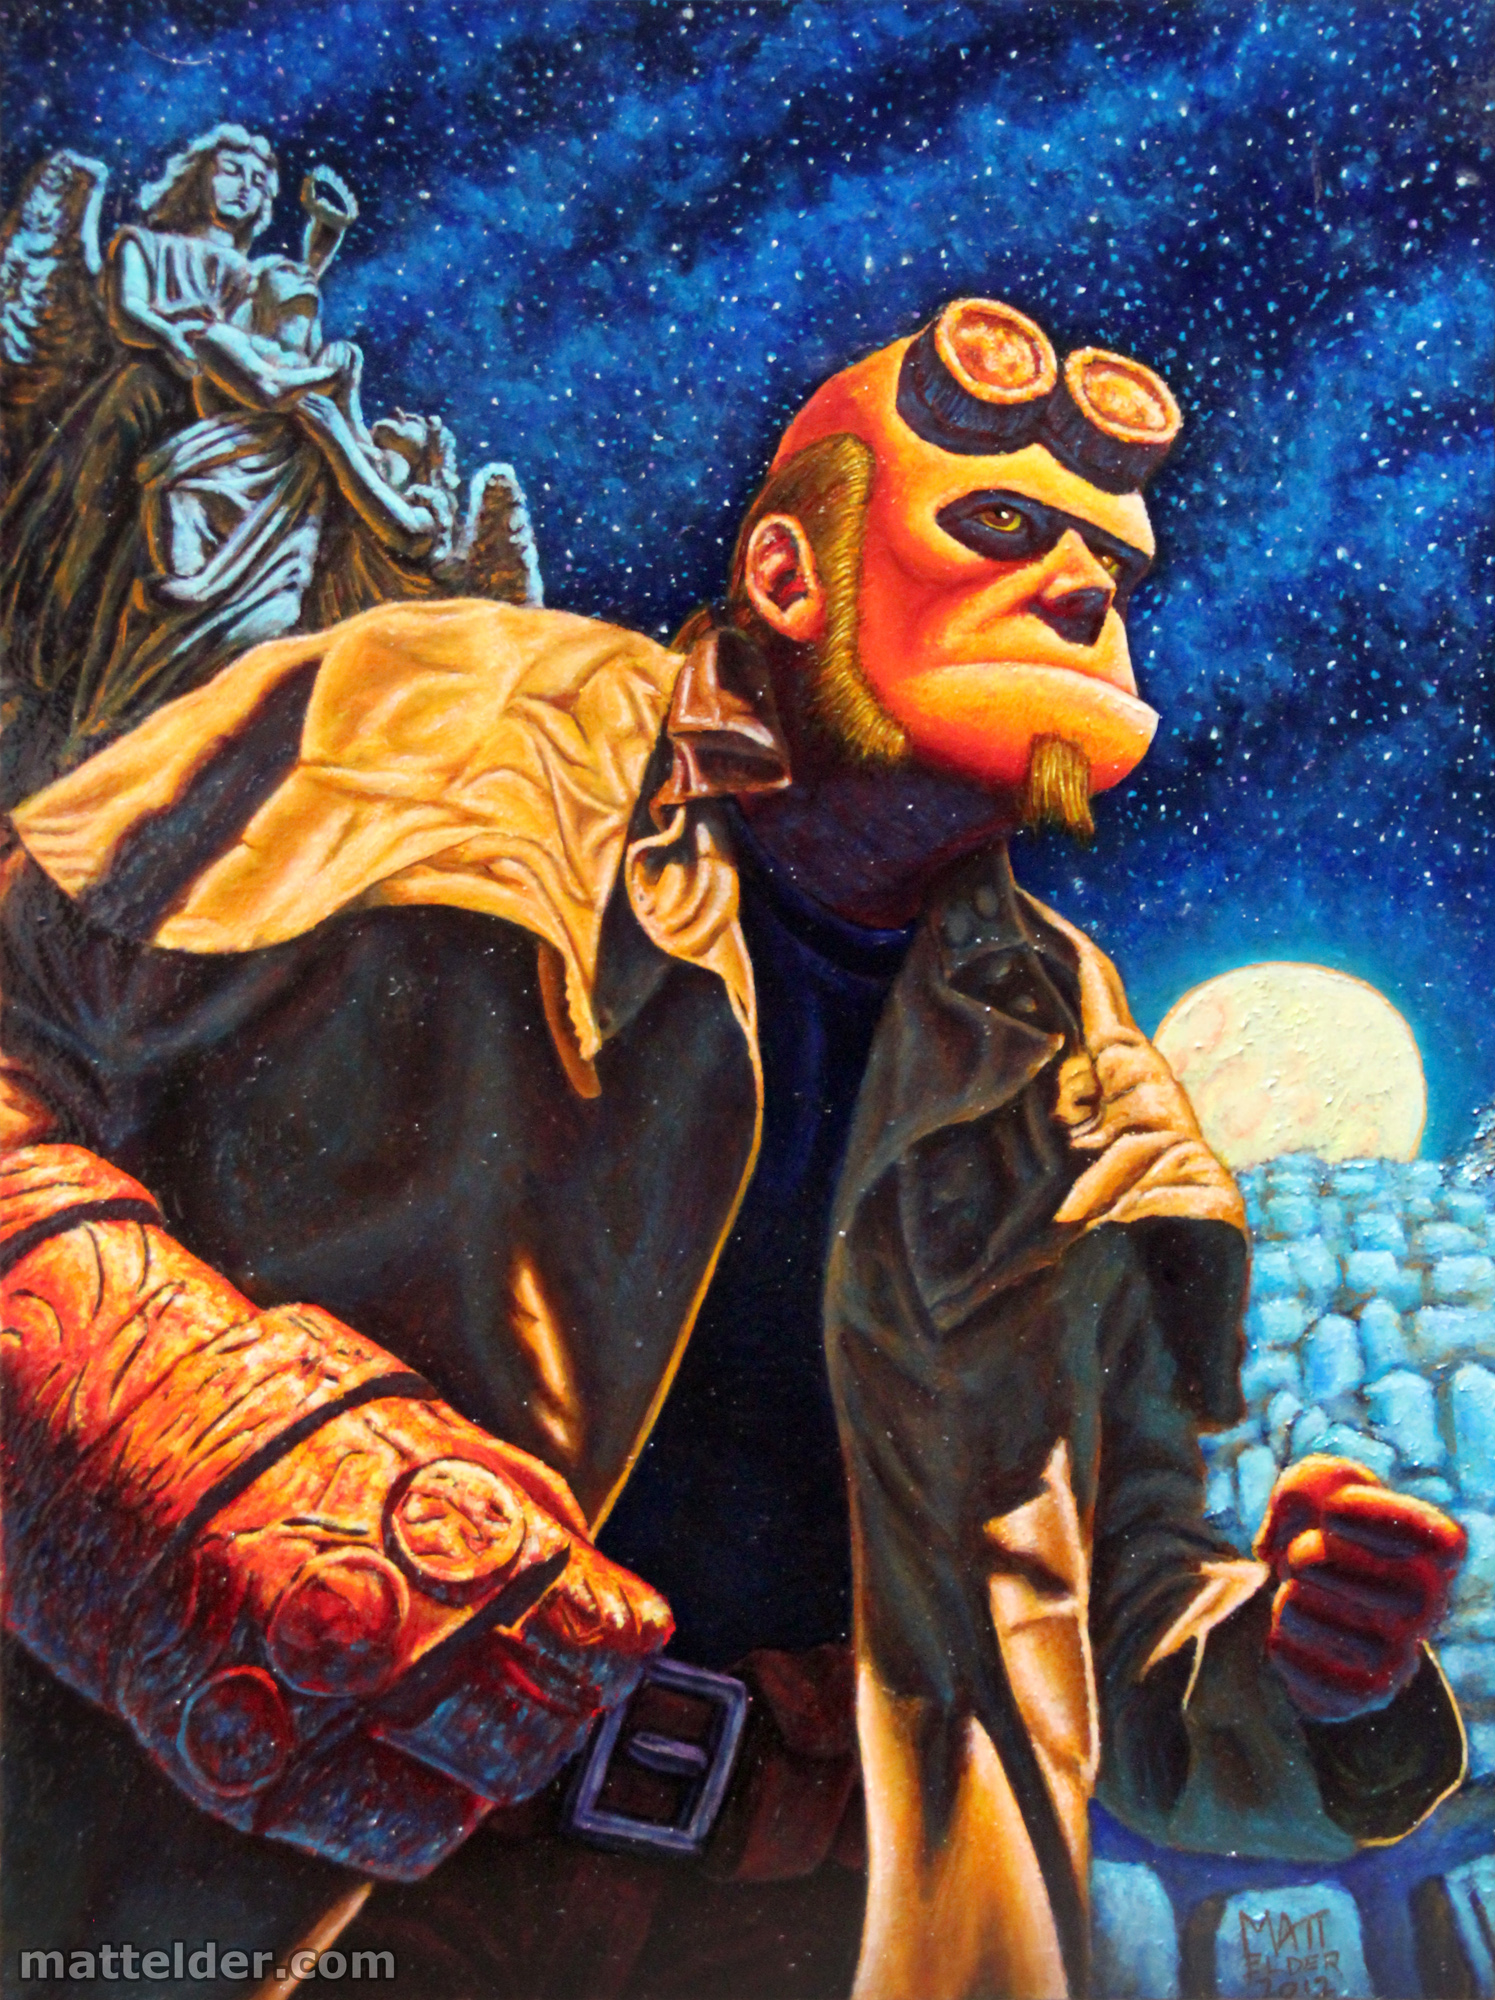 Hellboy at the Cemetary - Portrait Oil Painting